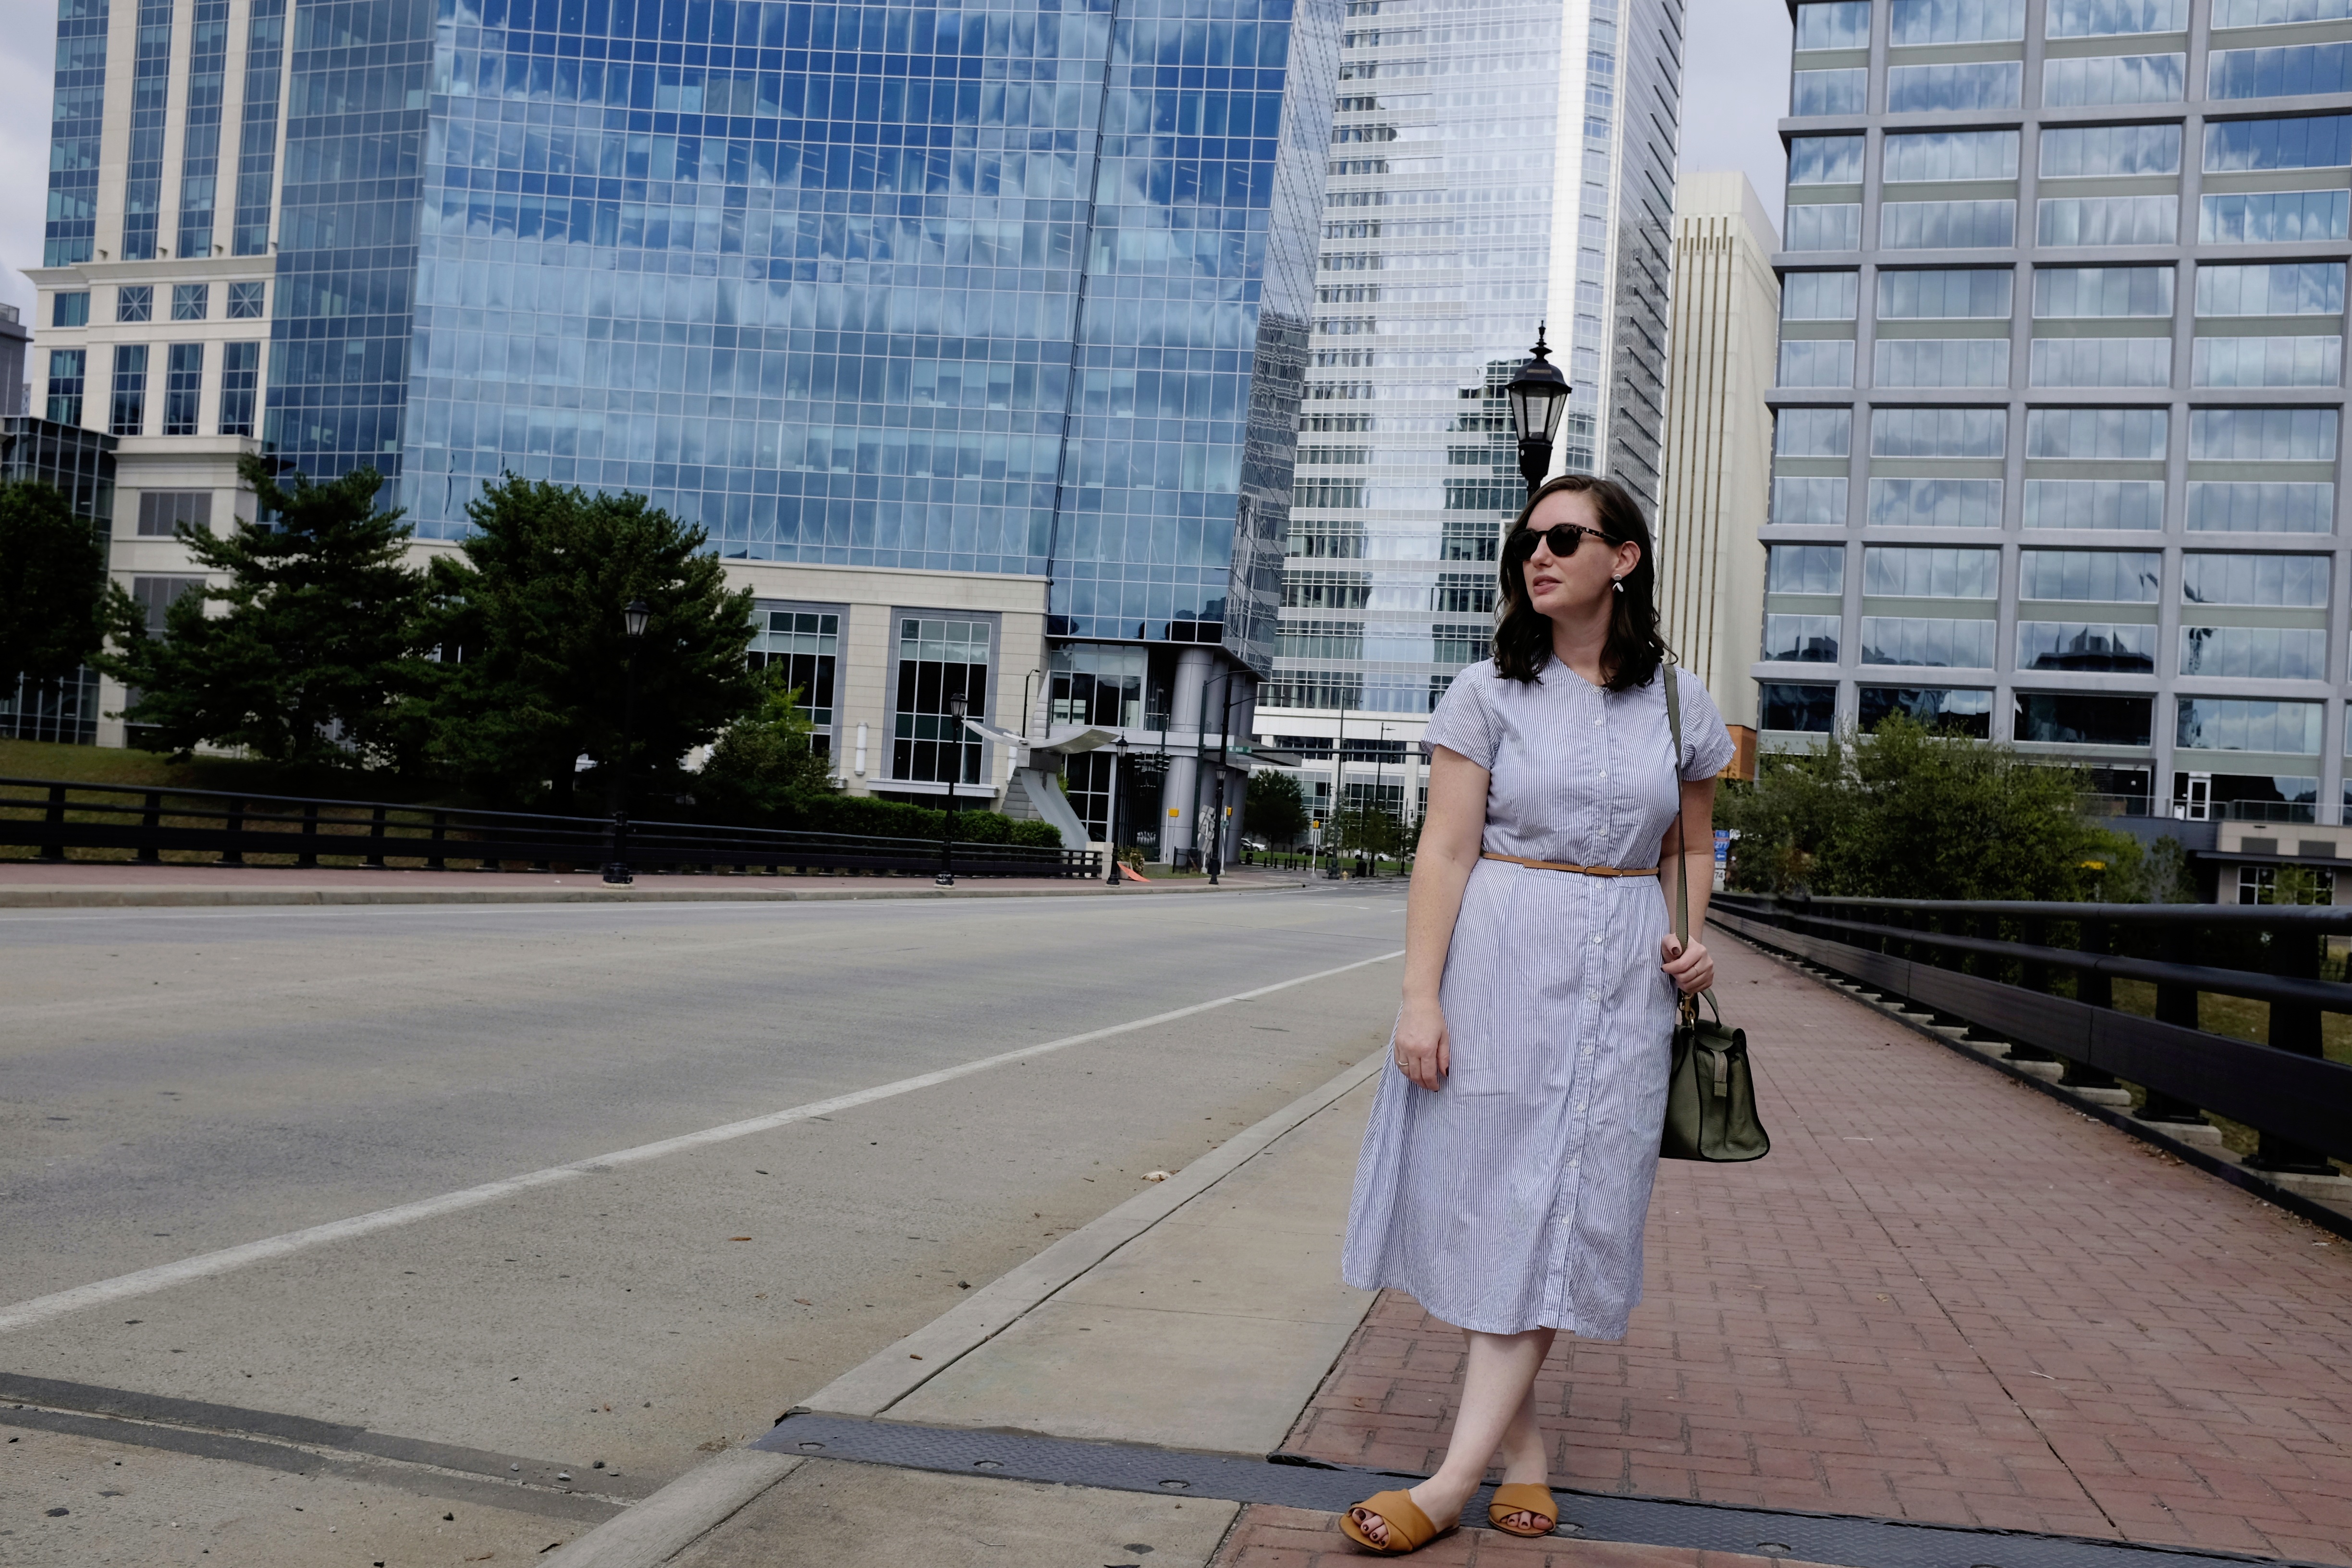 Alyssa stands in front of a street in the downtown area of Charlotte. You can see large buildings in the background, and she is wearing a blue striped dress with orange/brown sandals.